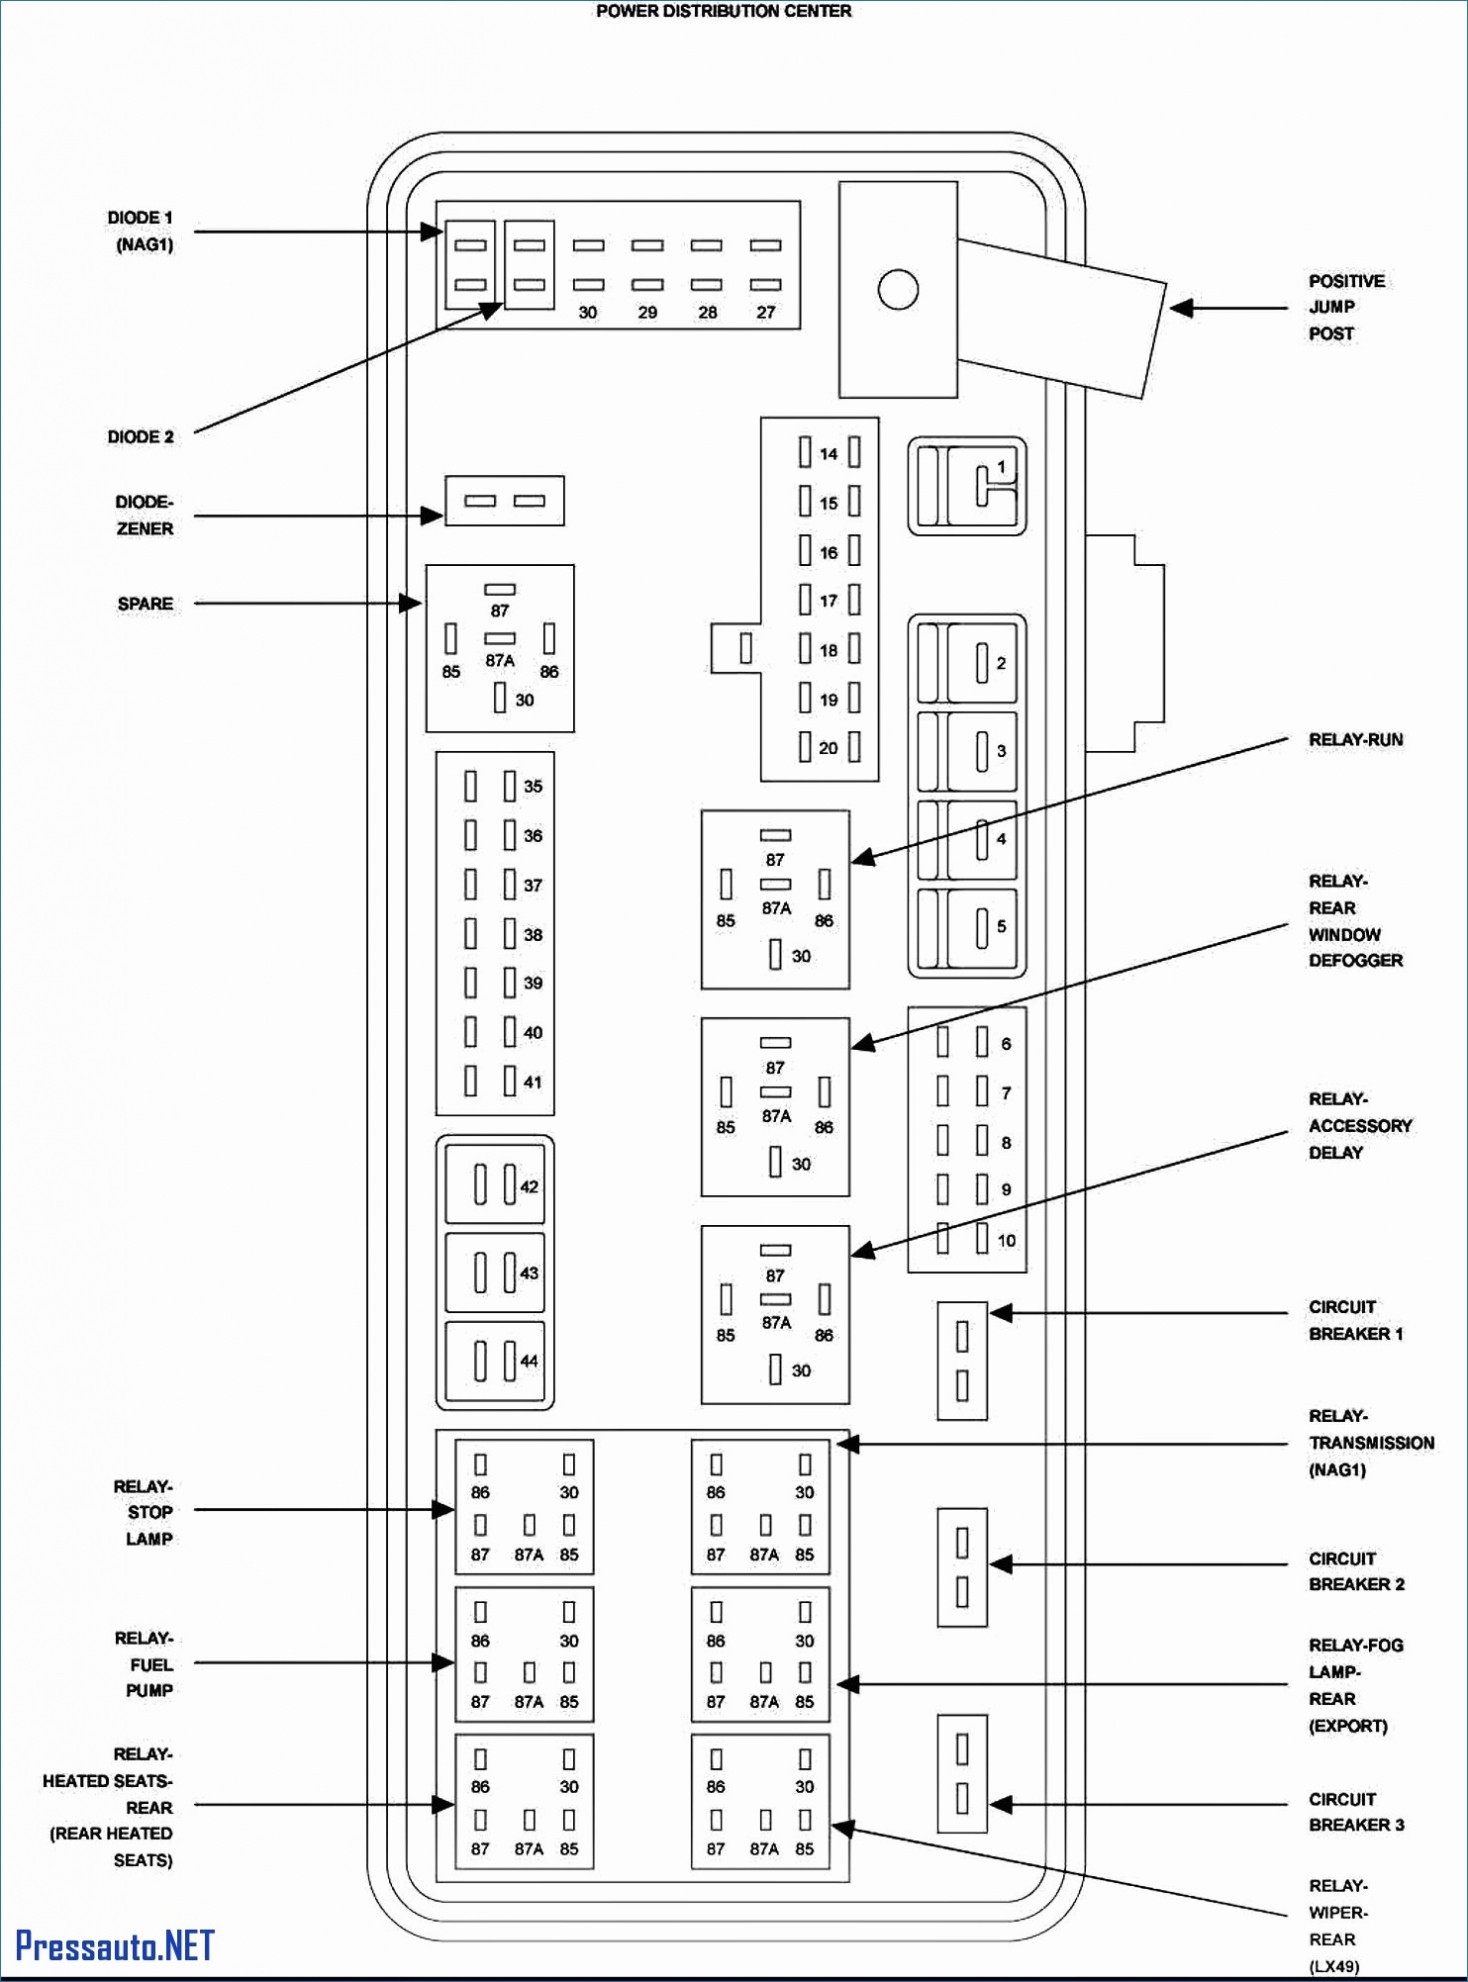 Car sound System Wiring Diagram Car Audio System 2 Din Archives Citruscyclecenter Of Car sound System Wiring Diagram